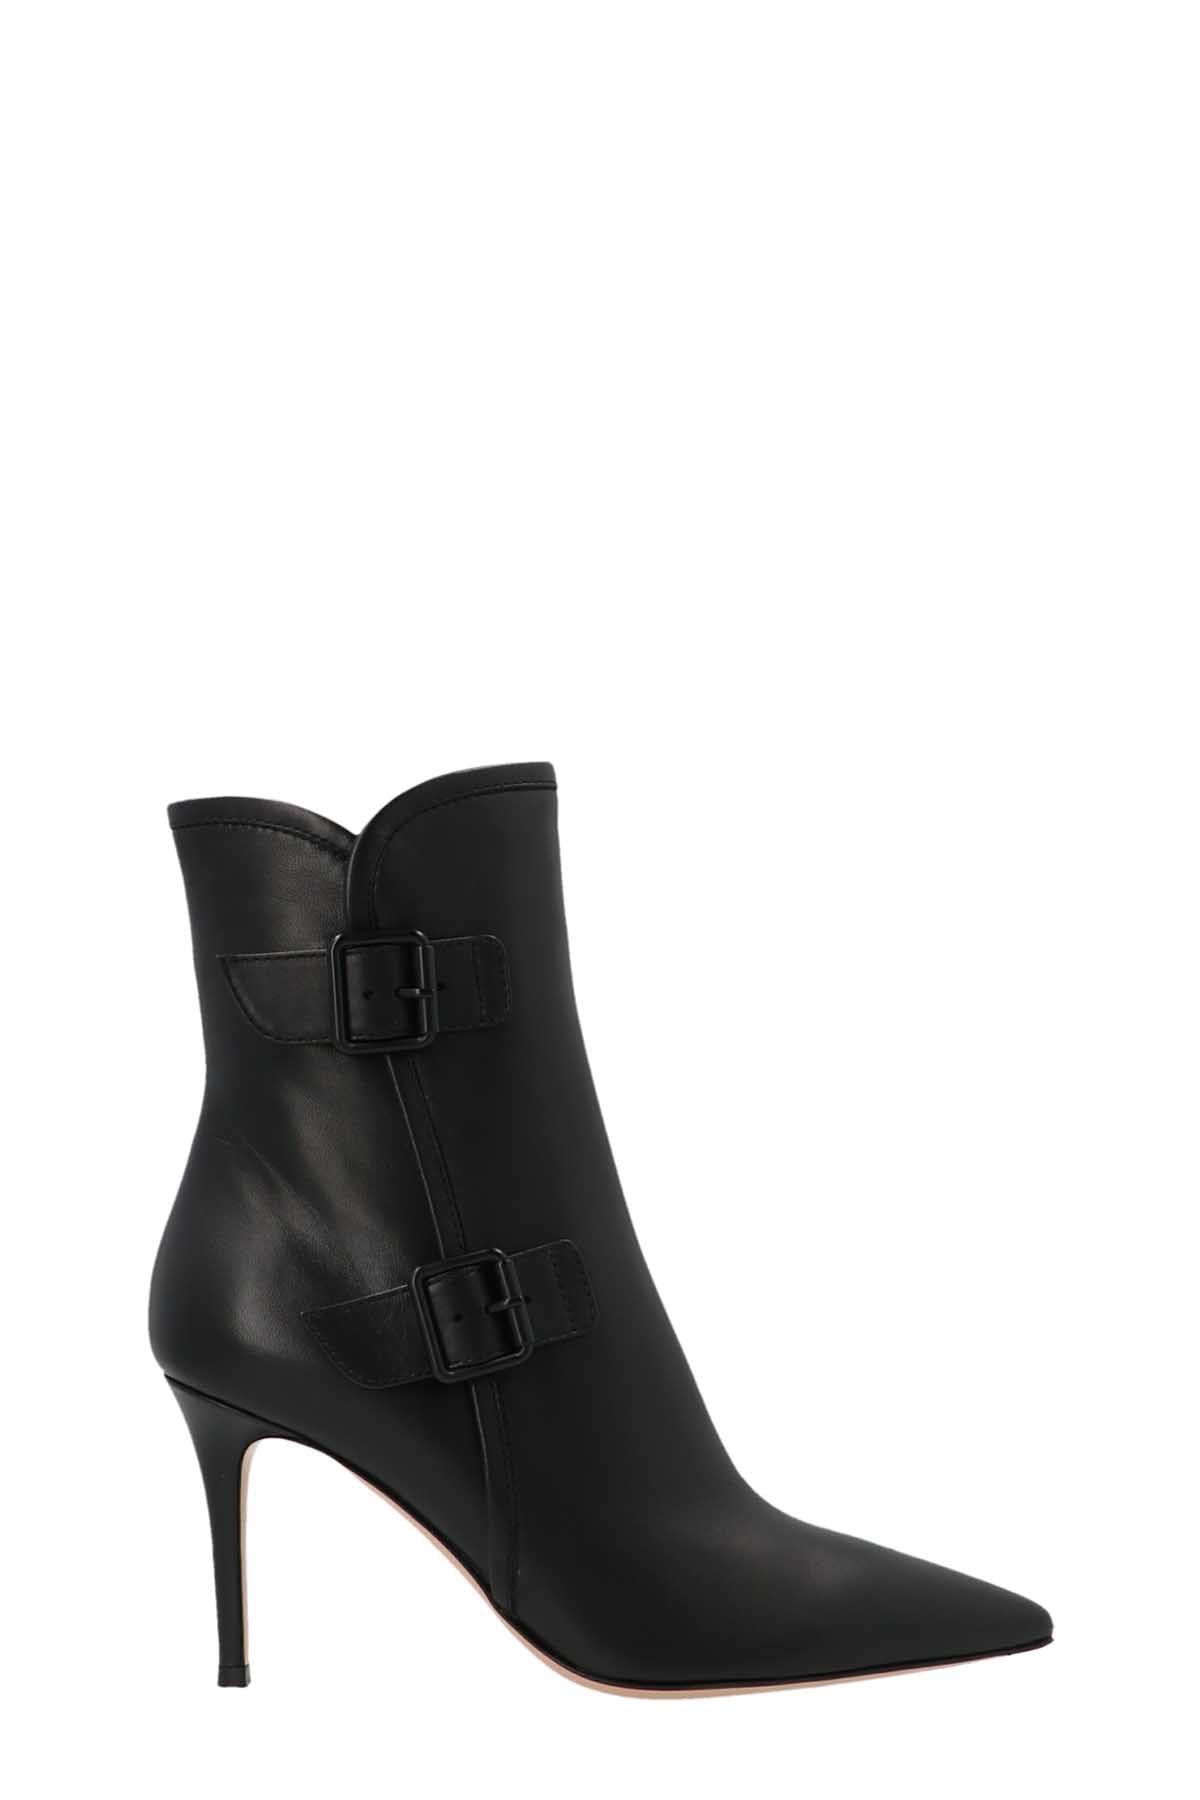 GIANVITO ROSSI Buckle Ankle Boots